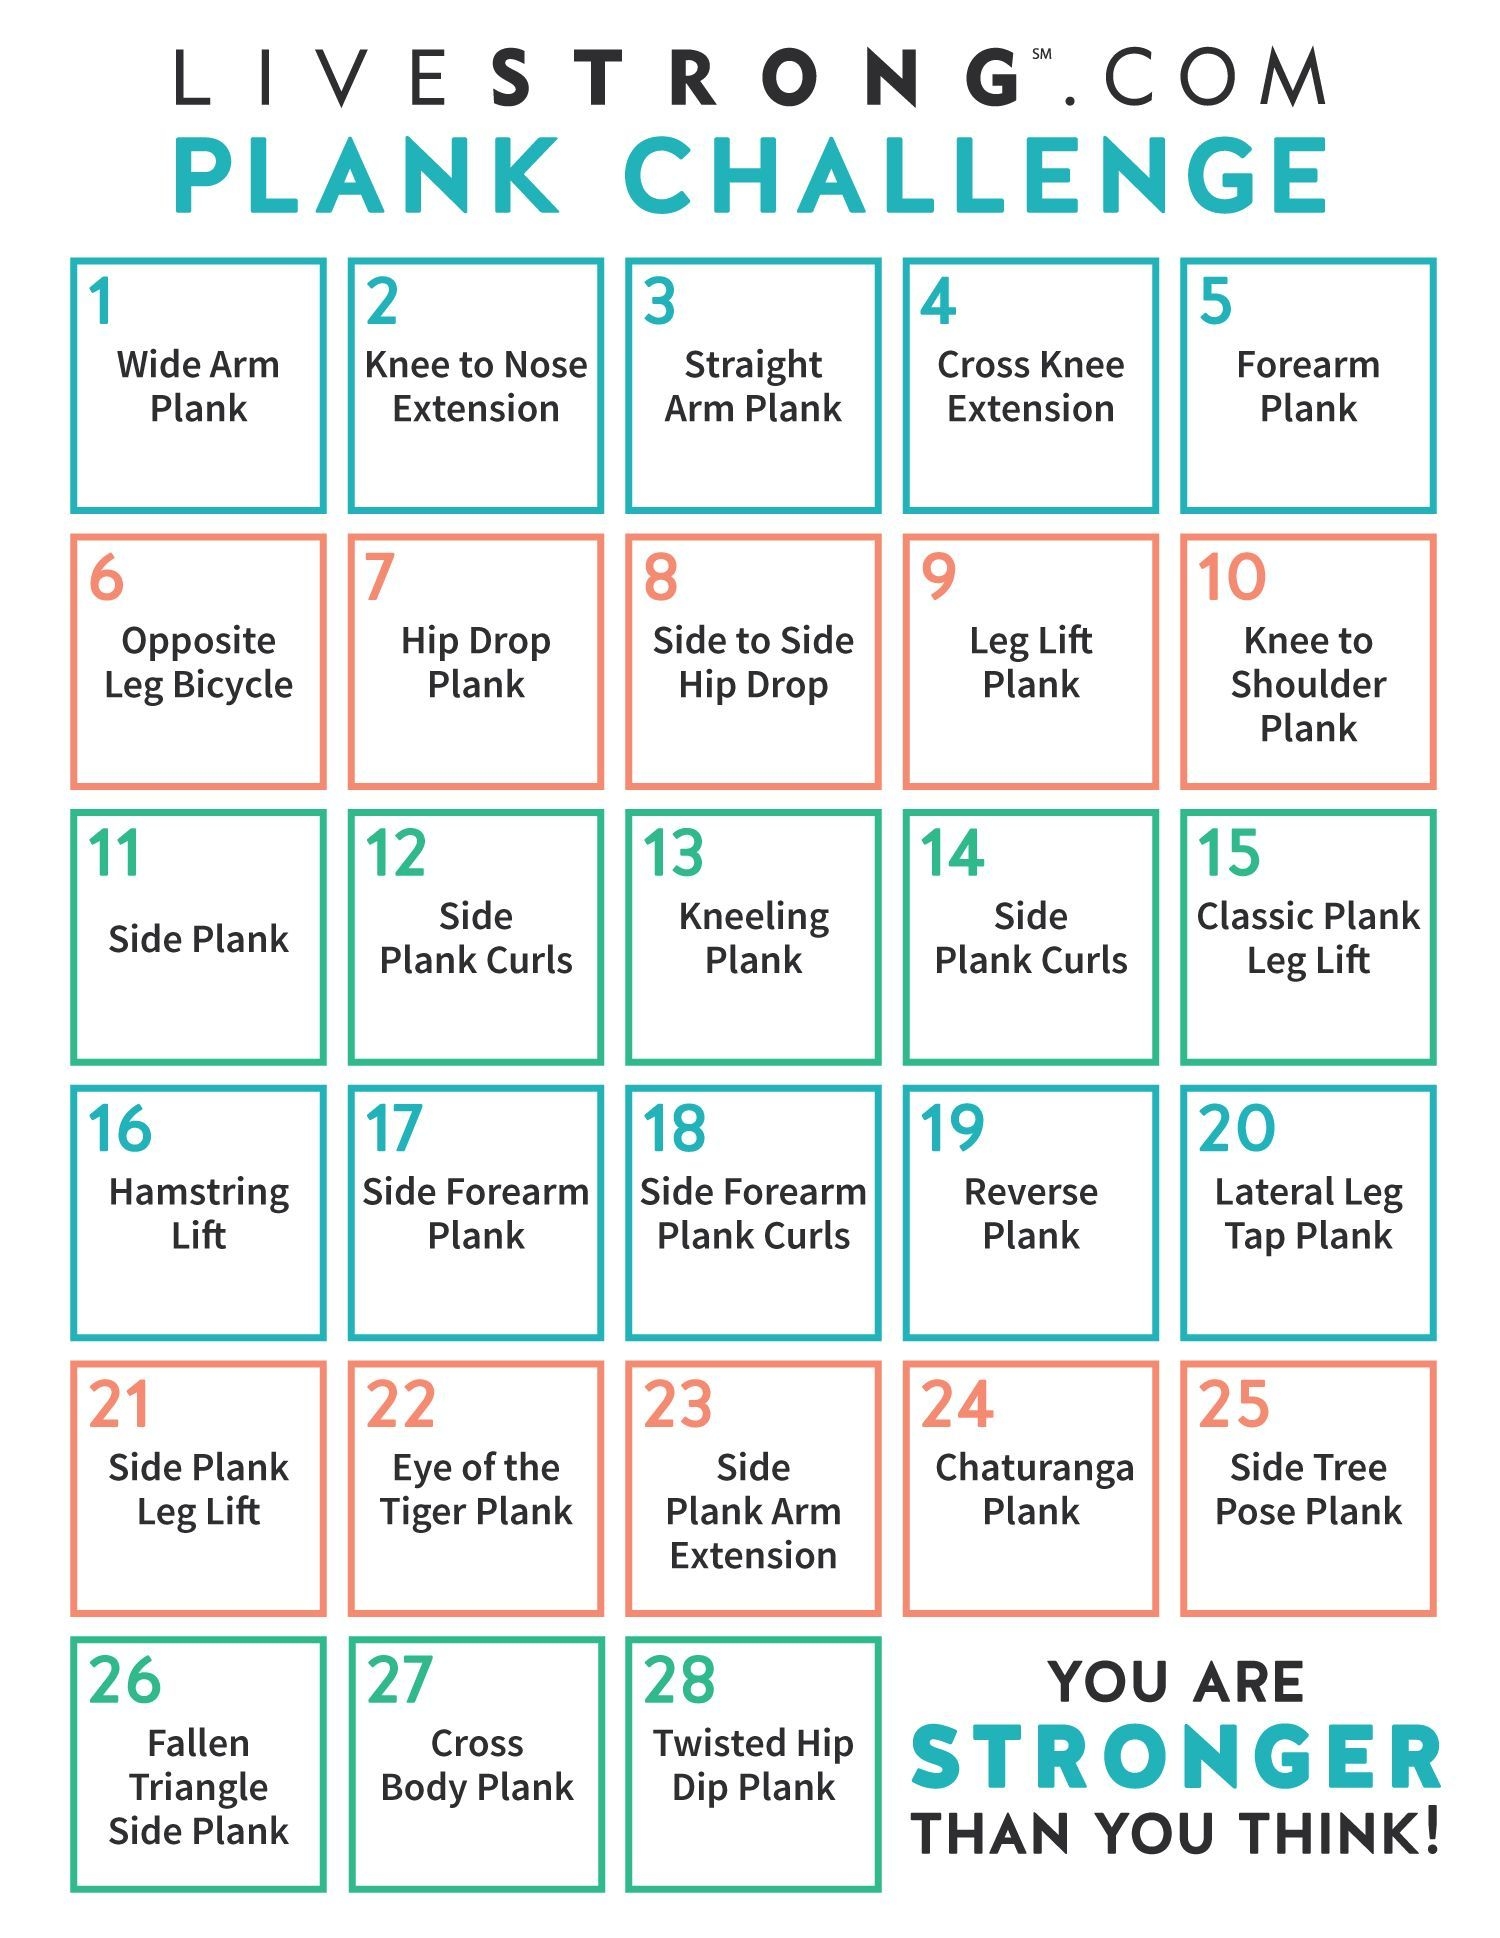 The 4-Week Plank Challenge (With Images) | Plank Challenge